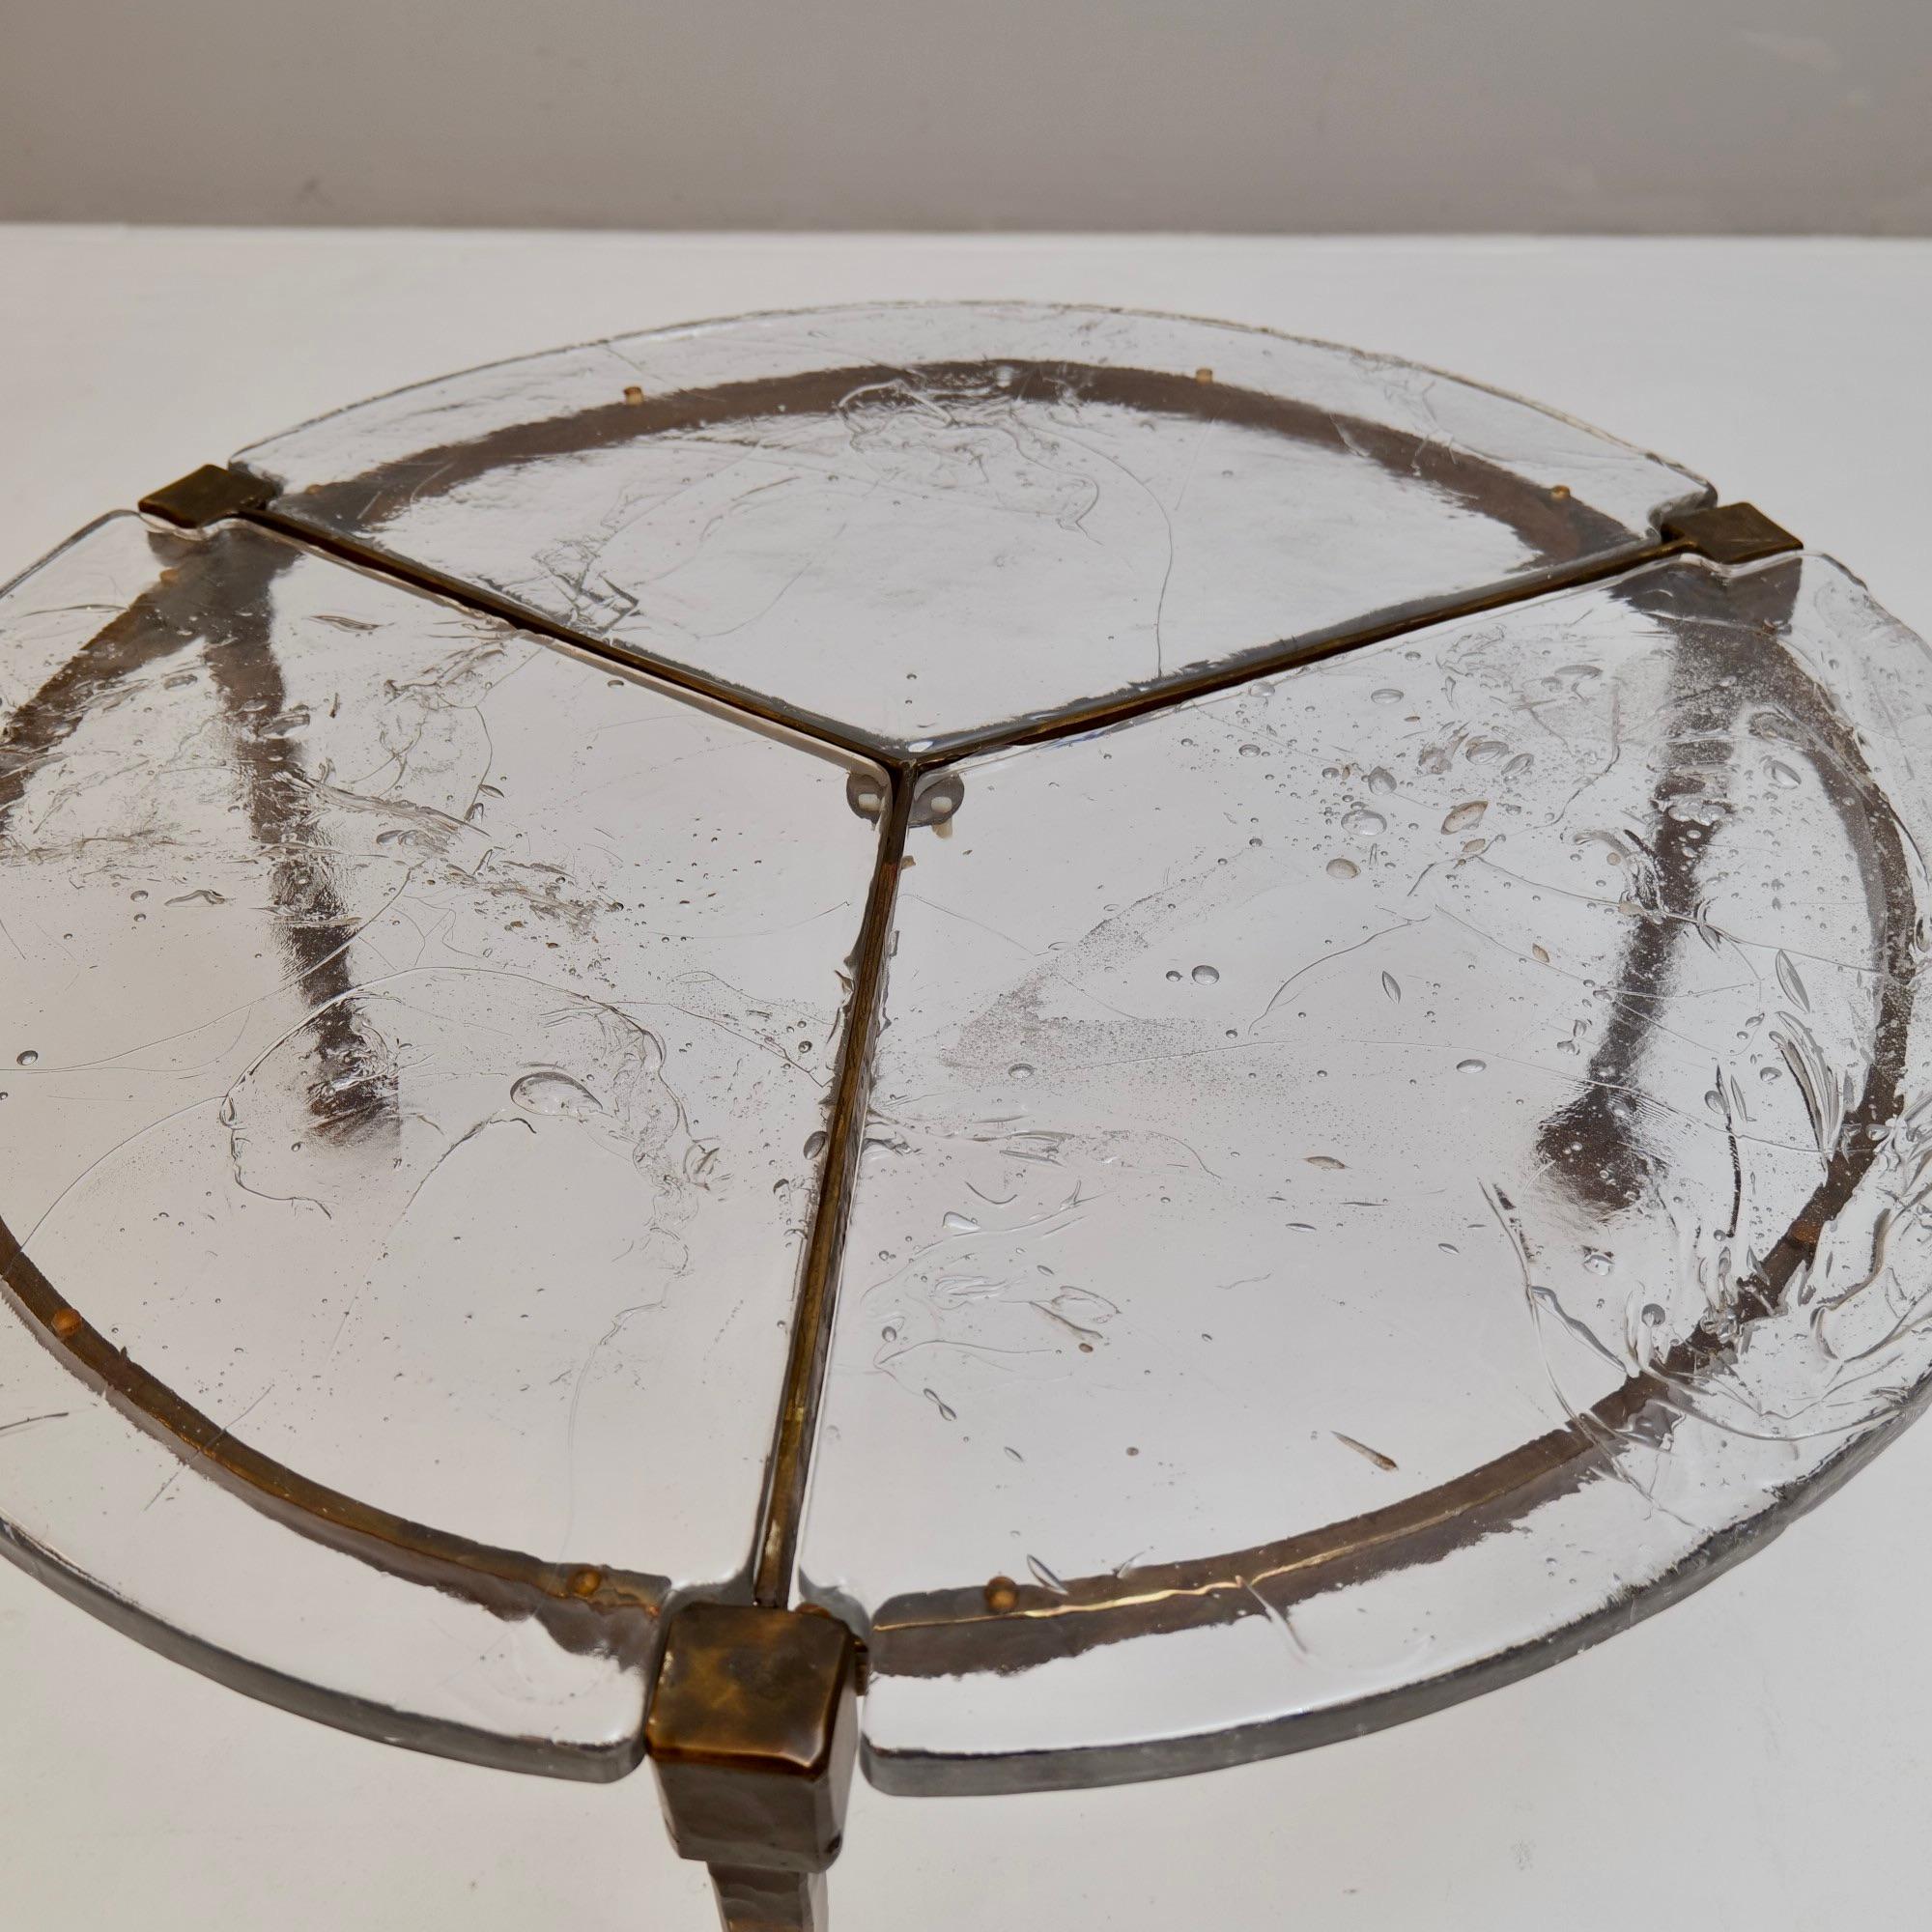 Cast forged bronze & glass table by Lothar Klute - 1980s For Sale